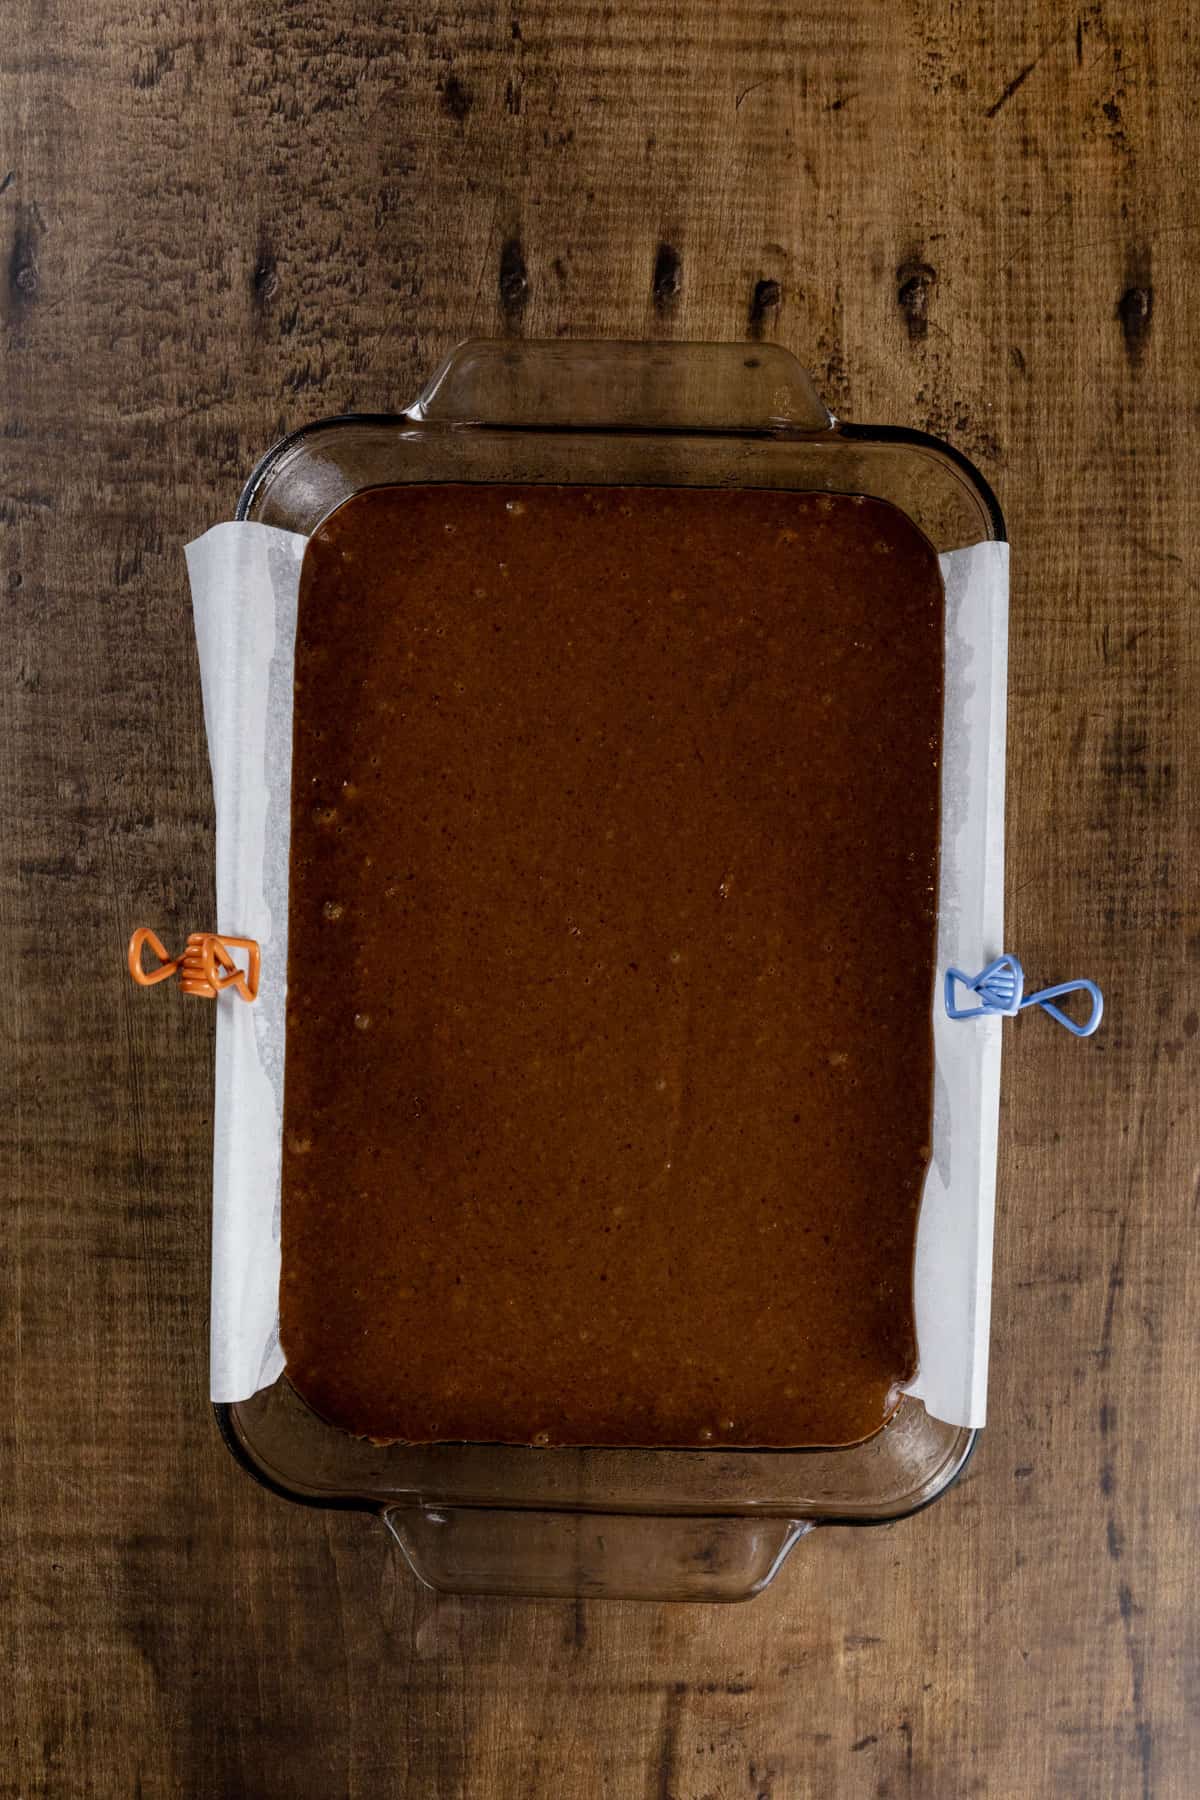 The chocolate cake in a glass pan with parchment paper before baking.